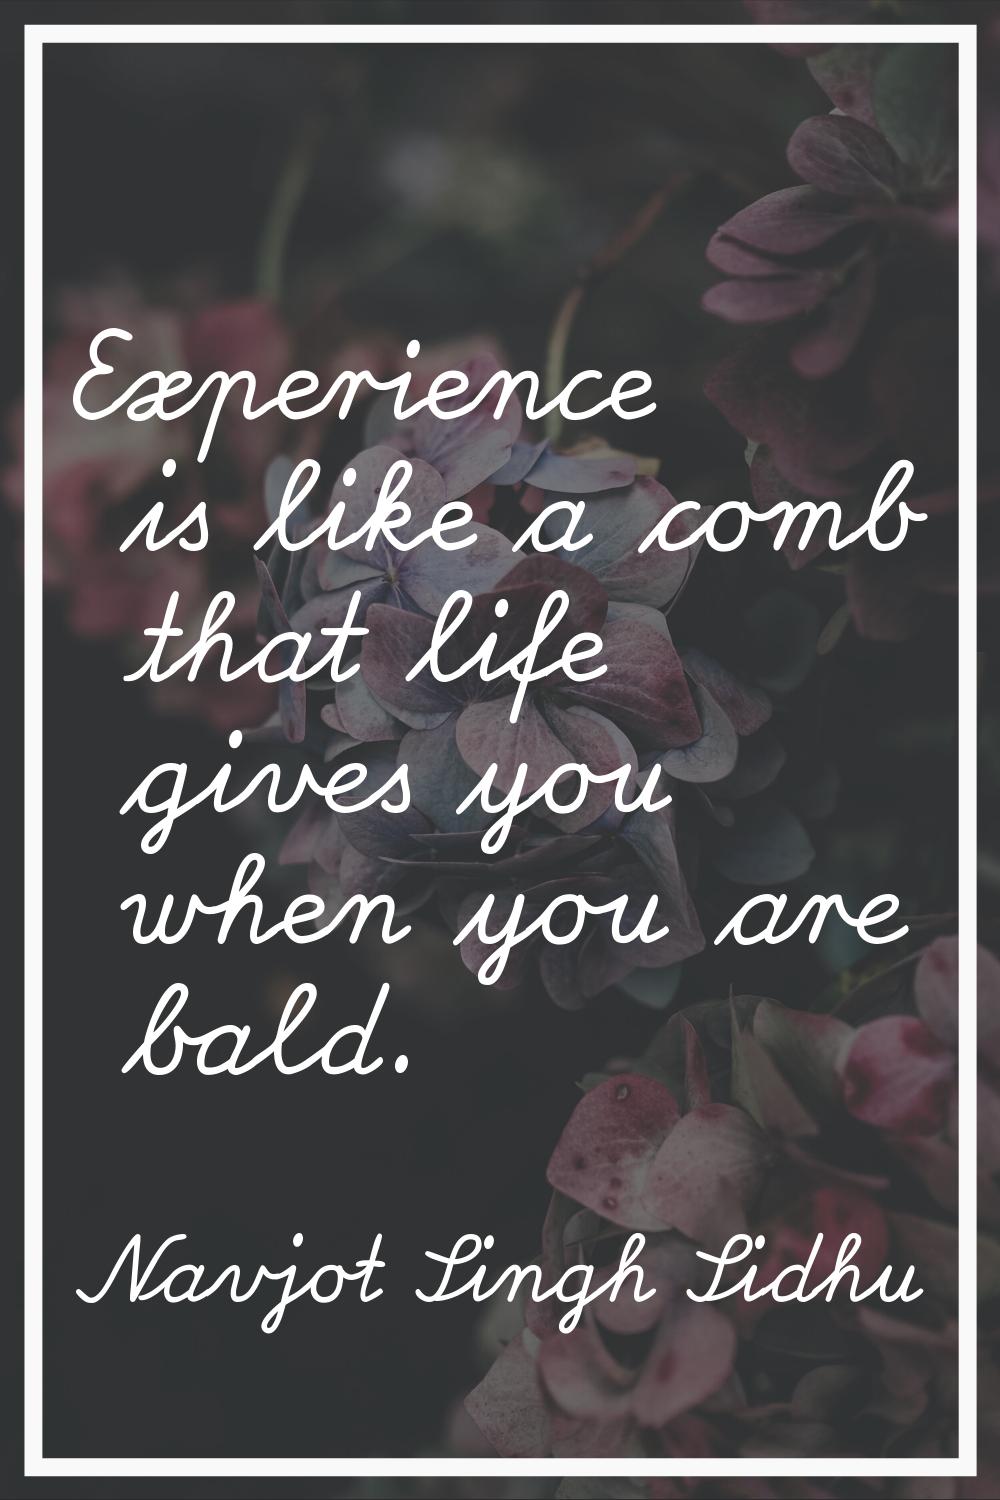 Experience is like a comb that life gives you when you are bald.